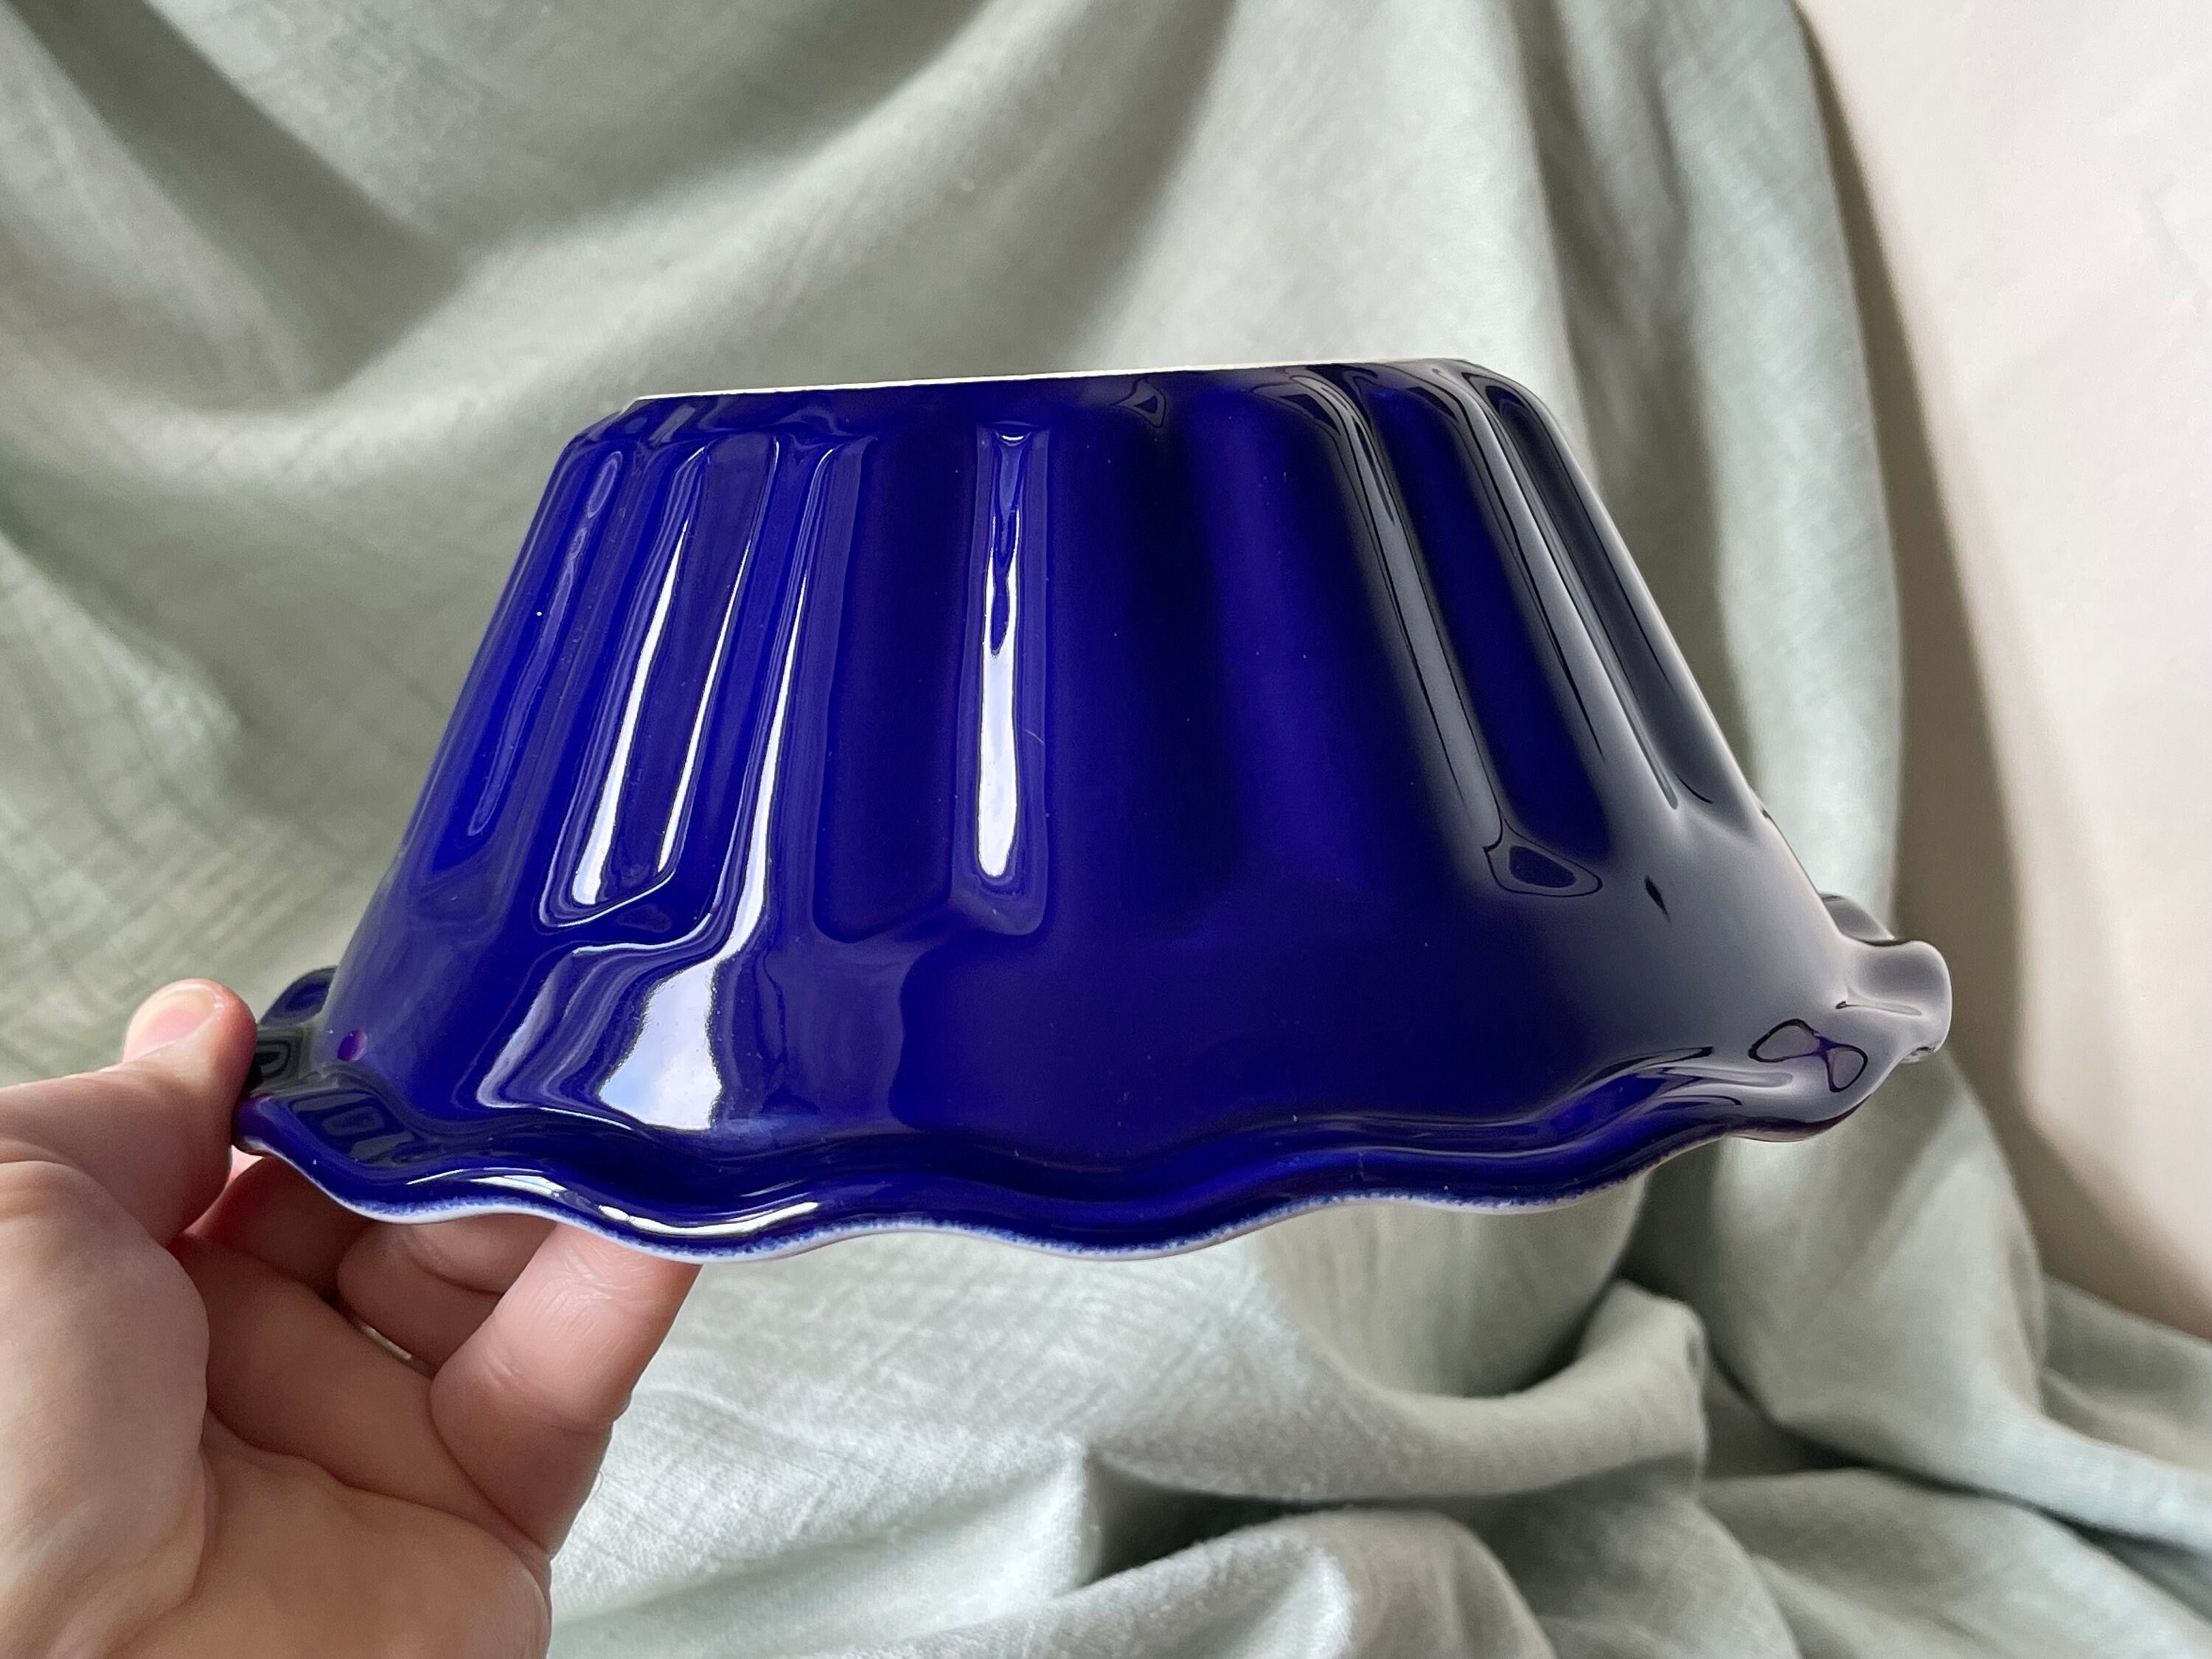 Vintage Emile Henry Baking Dish Cake Jelly Mold French Cobalt Blue Fluted  Scalloped Baking Dish French Country Home Made in France PC3068 